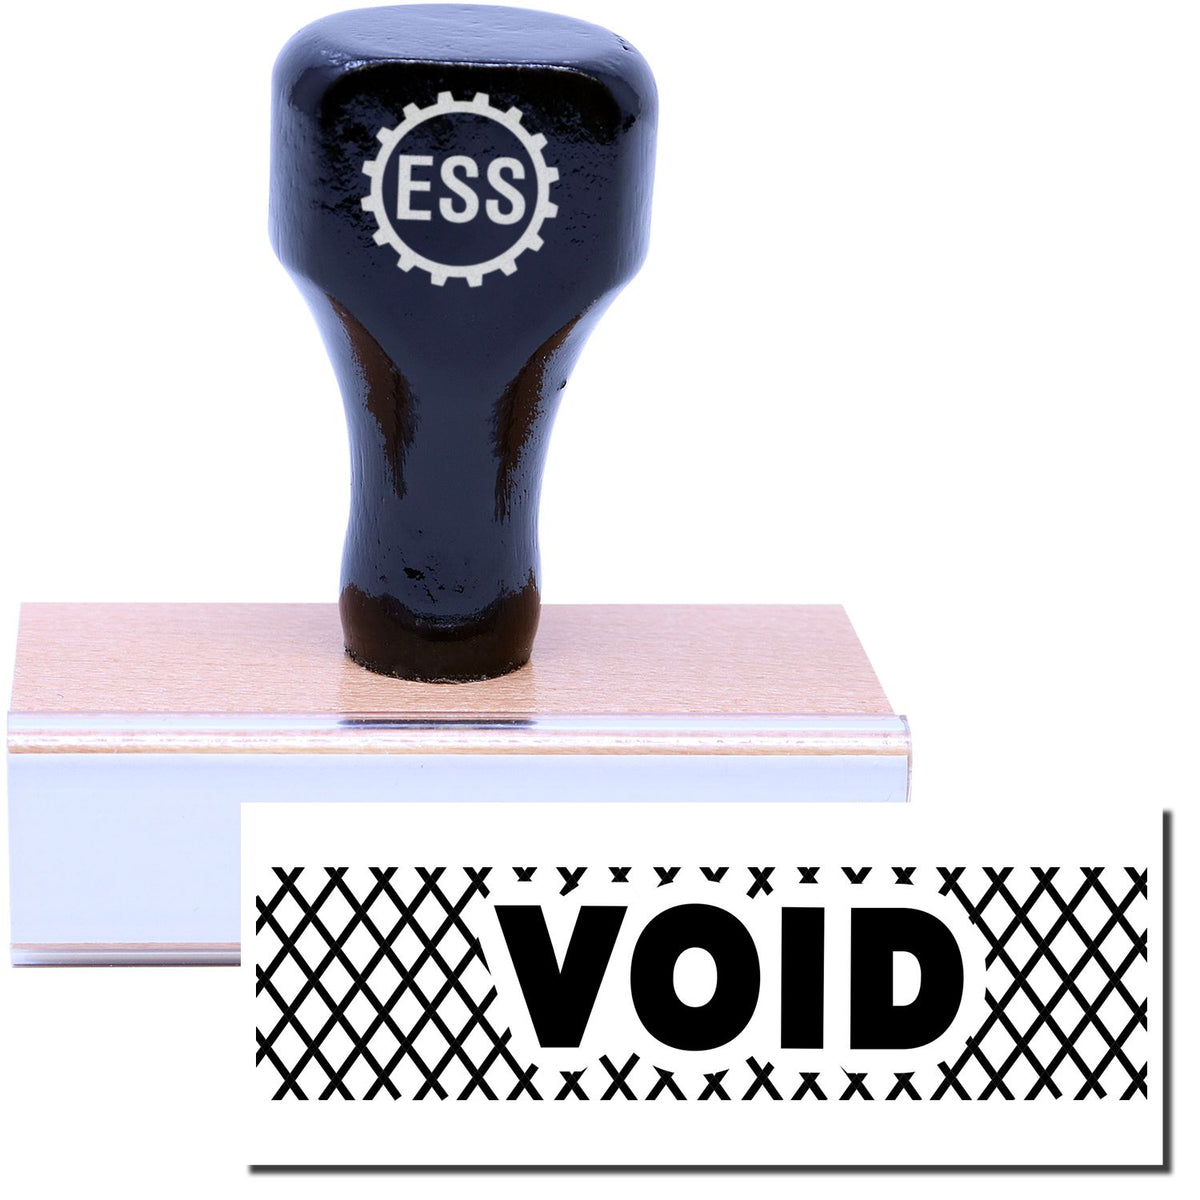 A stock office rubber stamp with a stamped image showing how the text &quot;VOID&quot; with strikelines all around the text is displayed after stamping.